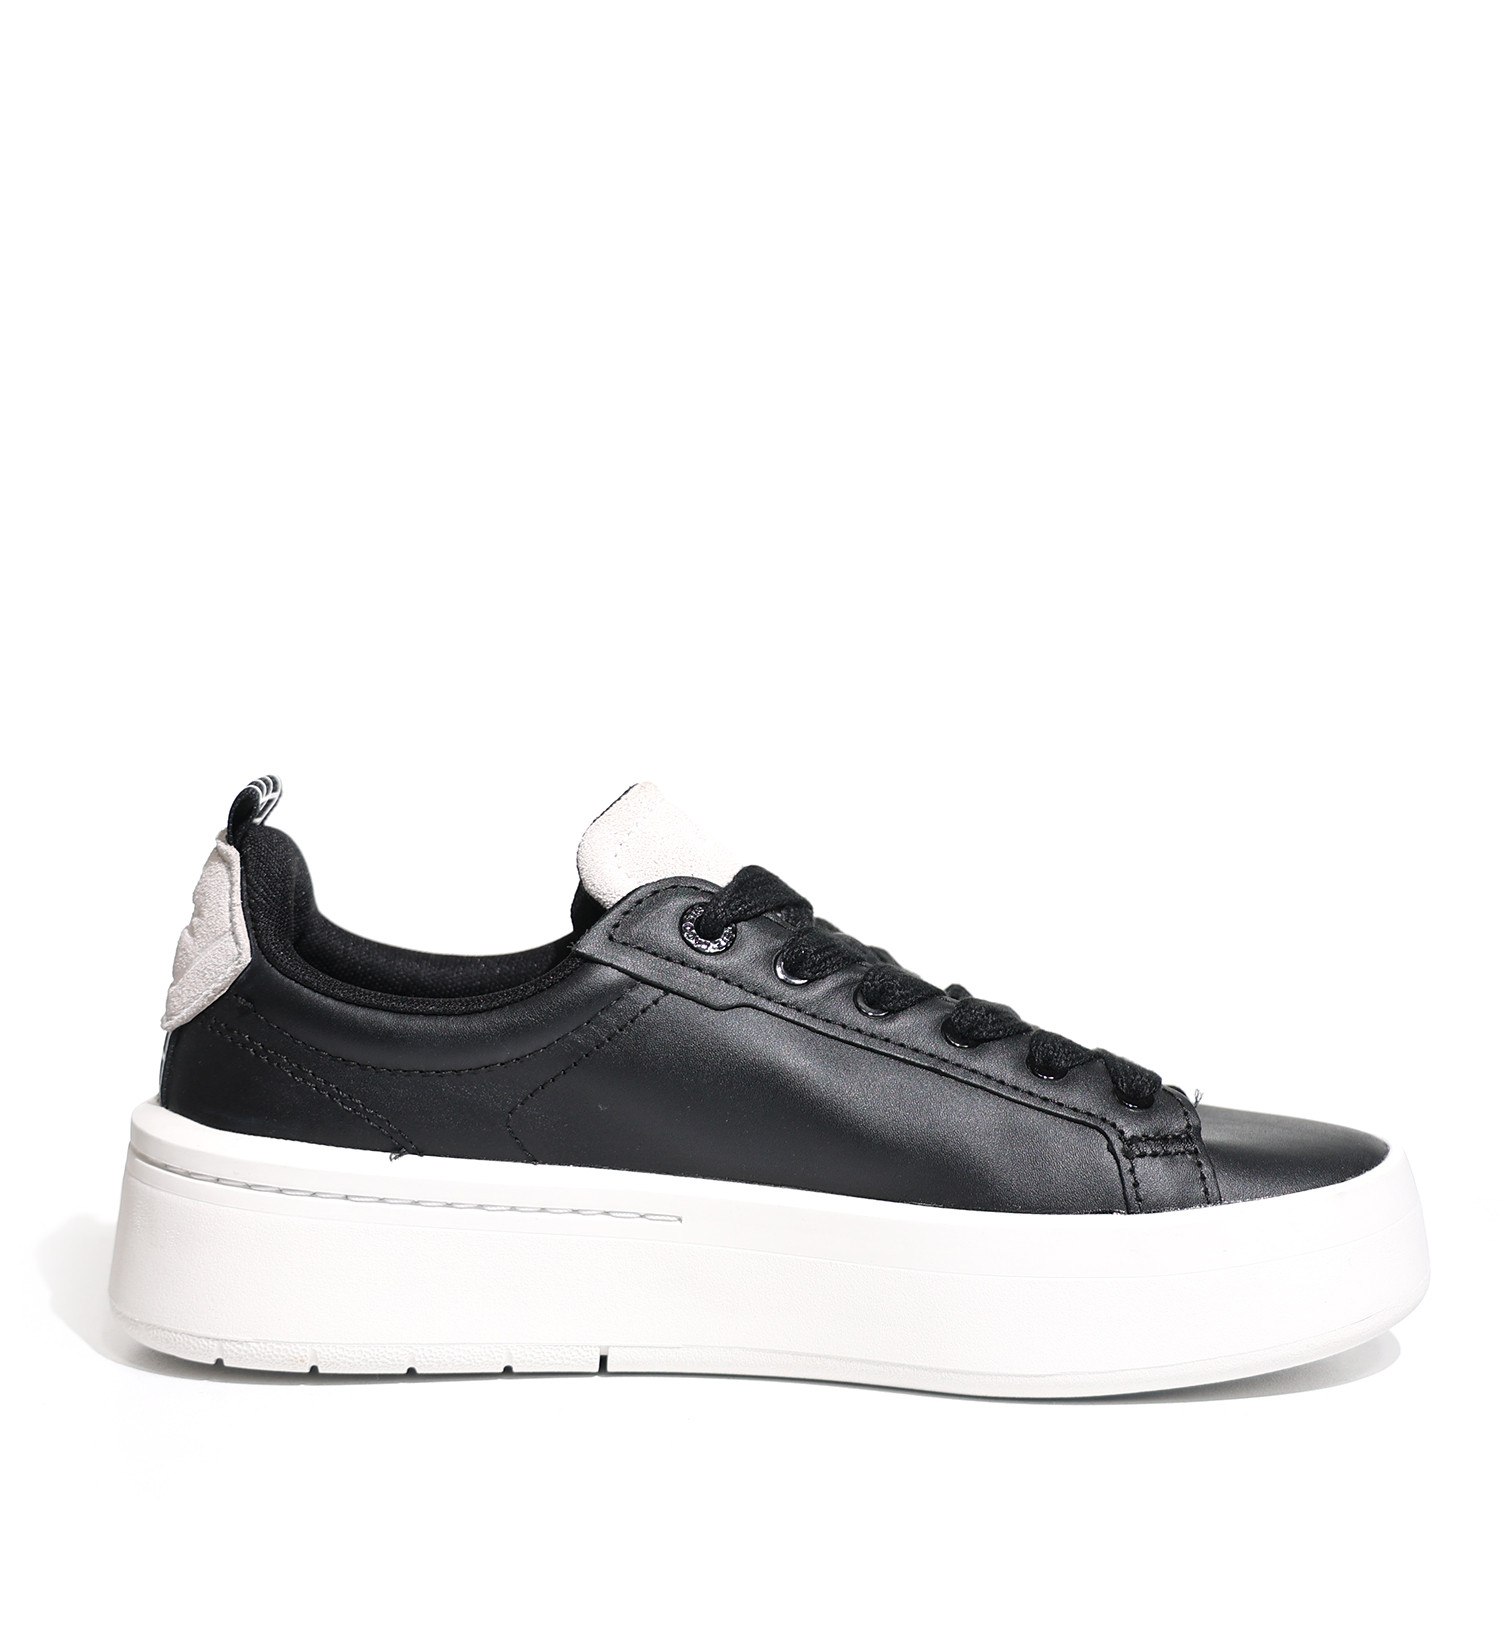 Lacoste - Carnaby Platform Leather Sneakers Size 36